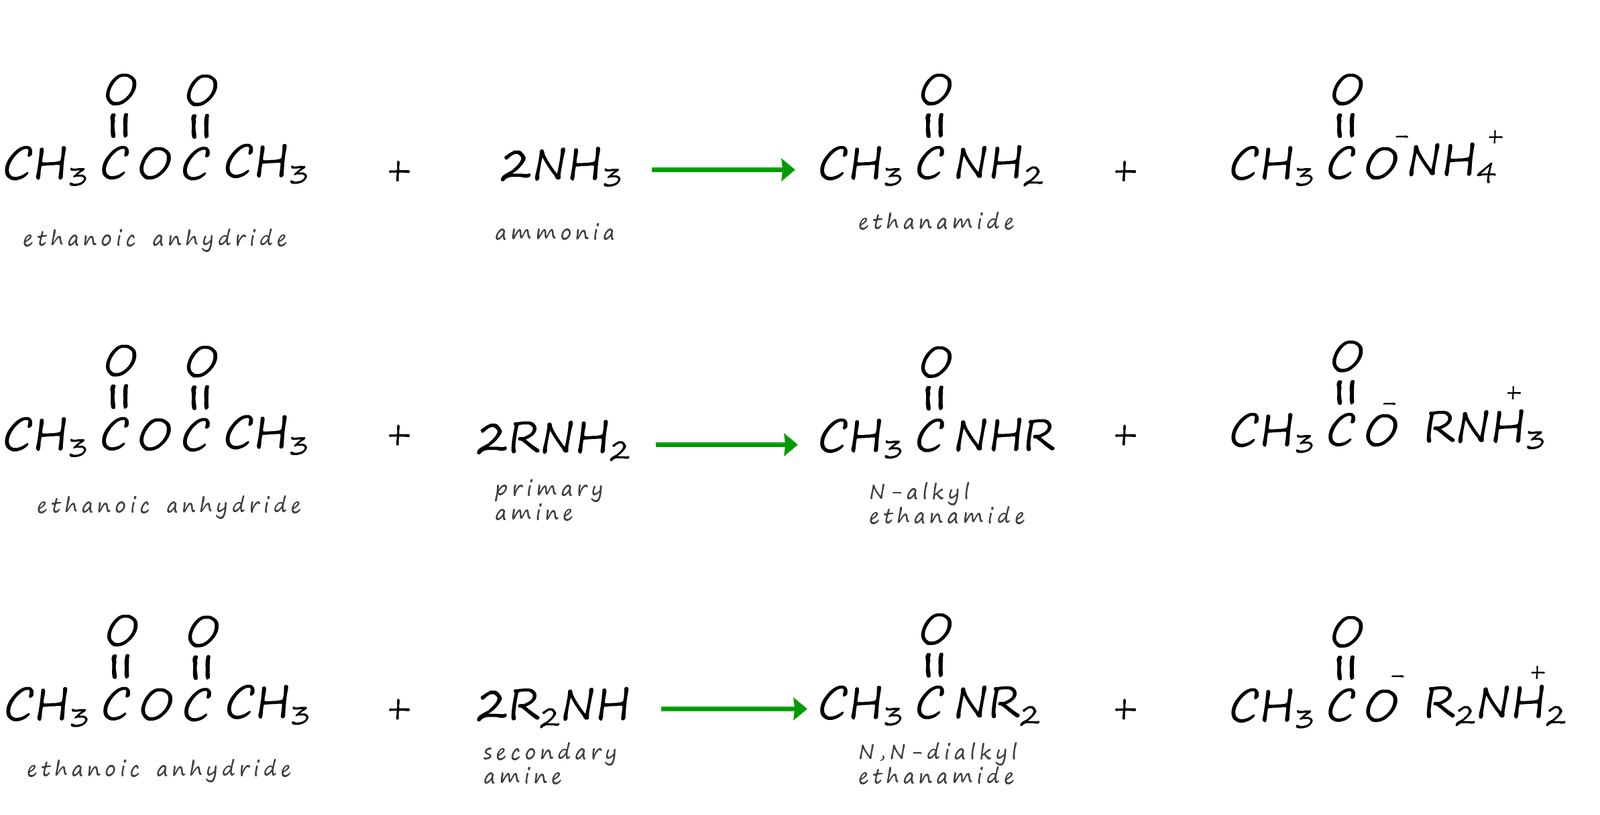 equations to show the reactions of ammonia, primary amines 
and secondary amines with athe acid anhydride ethanoic anhydride